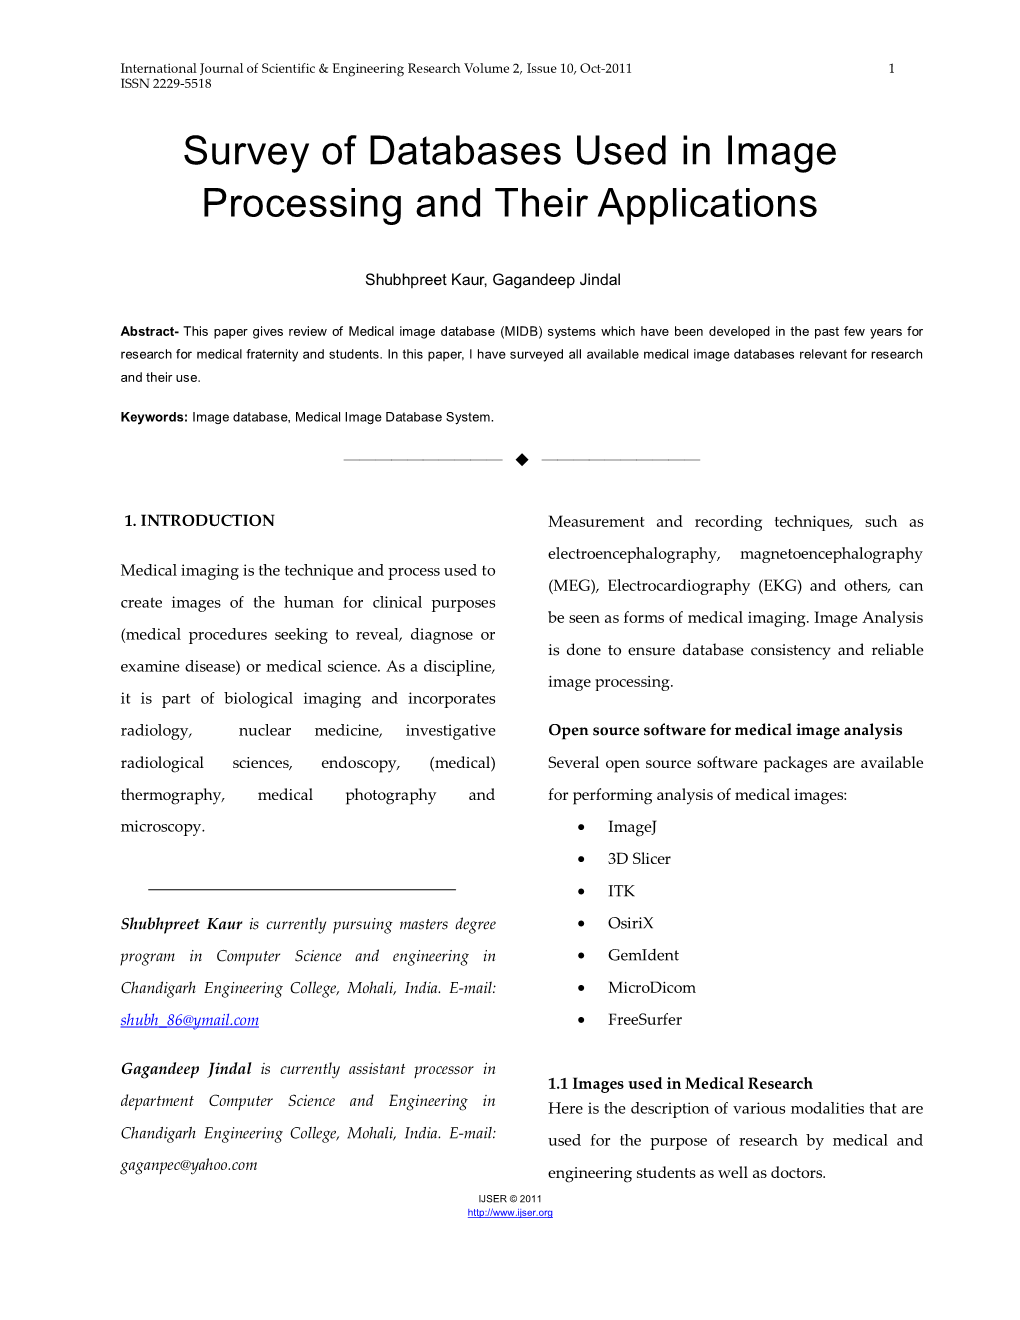 Survey of Databases Used in Image Processing and Their Applications